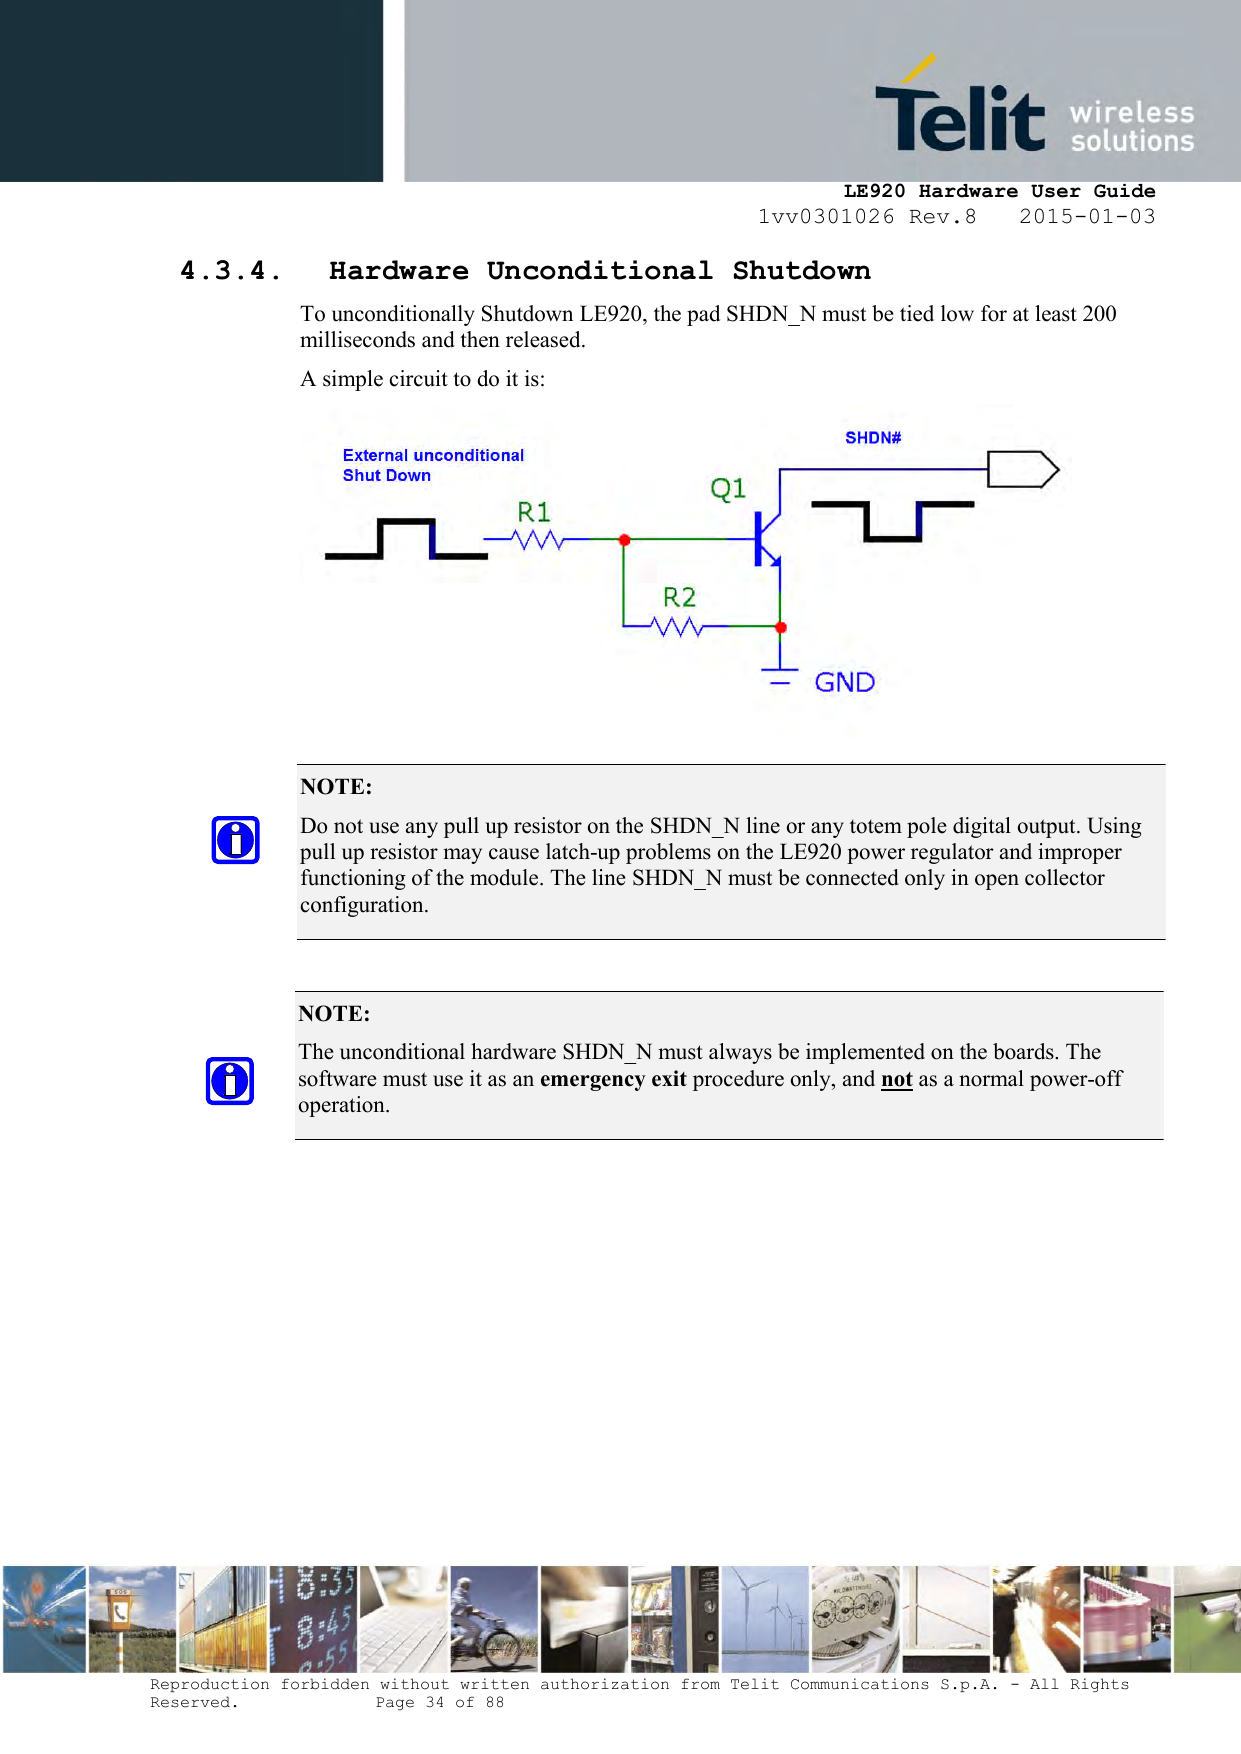     LE920 Hardware User Guide 1vv0301026 Rev.8   2015-01-03 Reproduction forbidden without written authorization from Telit Communications S.p.A. - All Rights Reserved.    Page 34 of 88  4.3.4. Hardware Unconditional Shutdown To unconditionally Shutdown LE920, the pad SHDN_N must be tied low for at least 200 milliseconds and then released. A simple circuit to do it is:        NOTE:  Do not use any pull up resistor on the SHDN_N line or any totem pole digital output. Using pull up resistor may cause latch-up problems on the LE920 power regulator and improper functioning of the module. The line SHDN_N must be connected only in open collector configuration. NOTE:  The unconditional hardware SHDN_N must always be implemented on the boards. The software must use it as an emergency exit procedure only, and not as a normal power-off operation. 